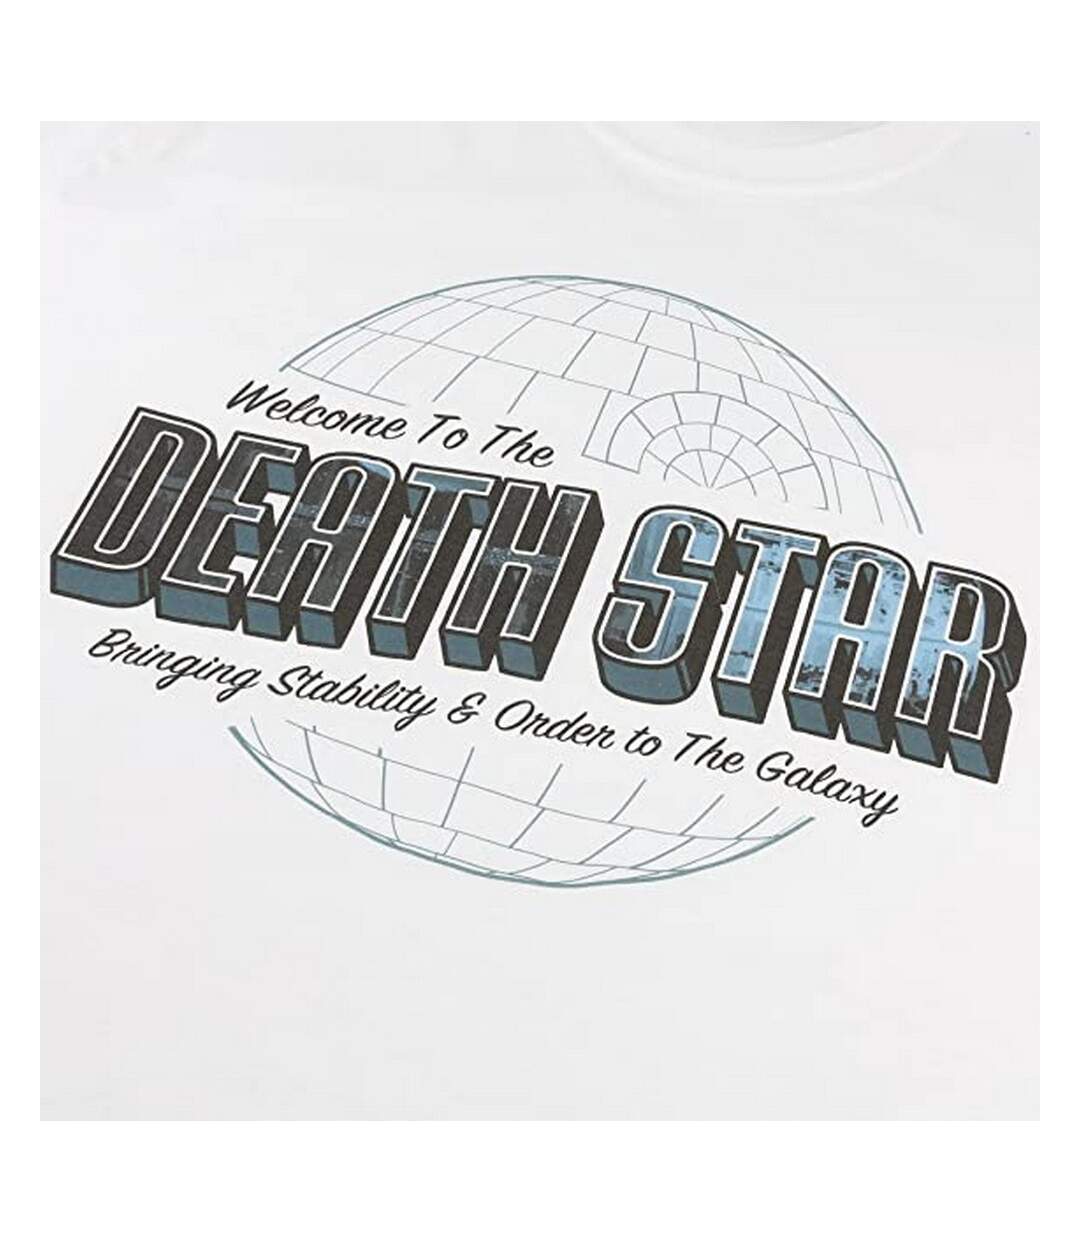 Star Wars - T-shirt WELCOME TO THE DEATH STAR - Homme (Blanc) - UTTV1299